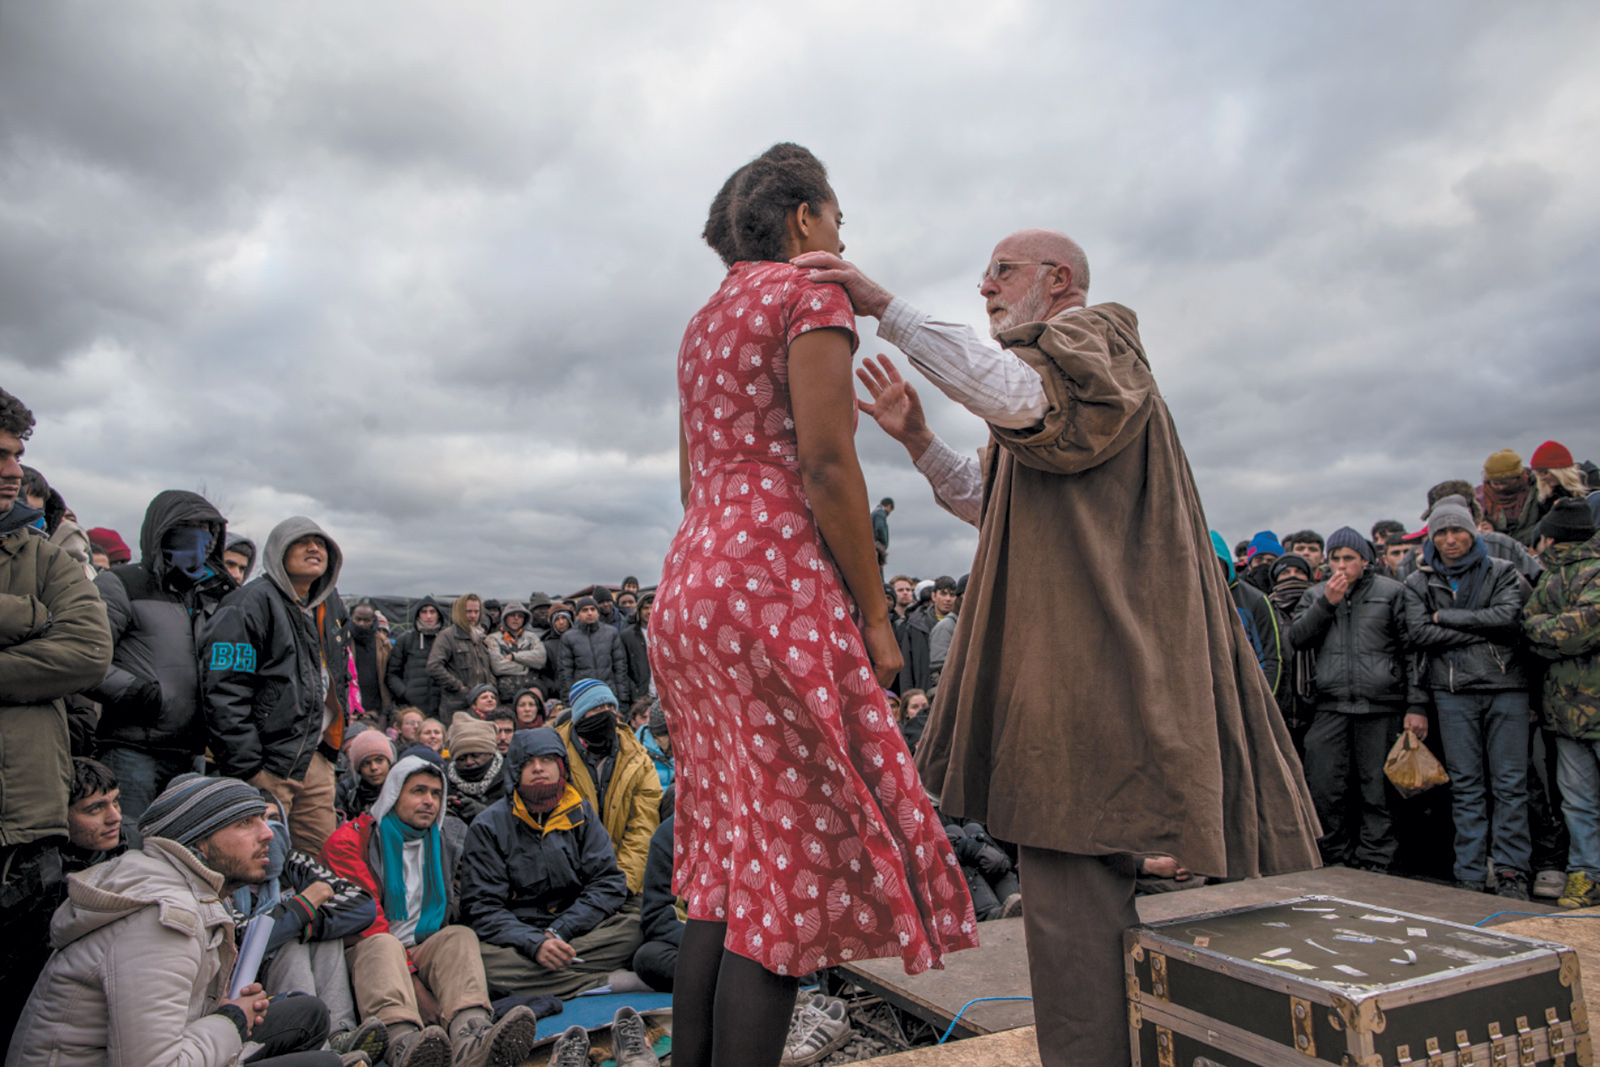 Actors from the Globe Theatre performing Hamlet for refugees and migrants in the Jungle refugee camp, Calais, France, February 2016